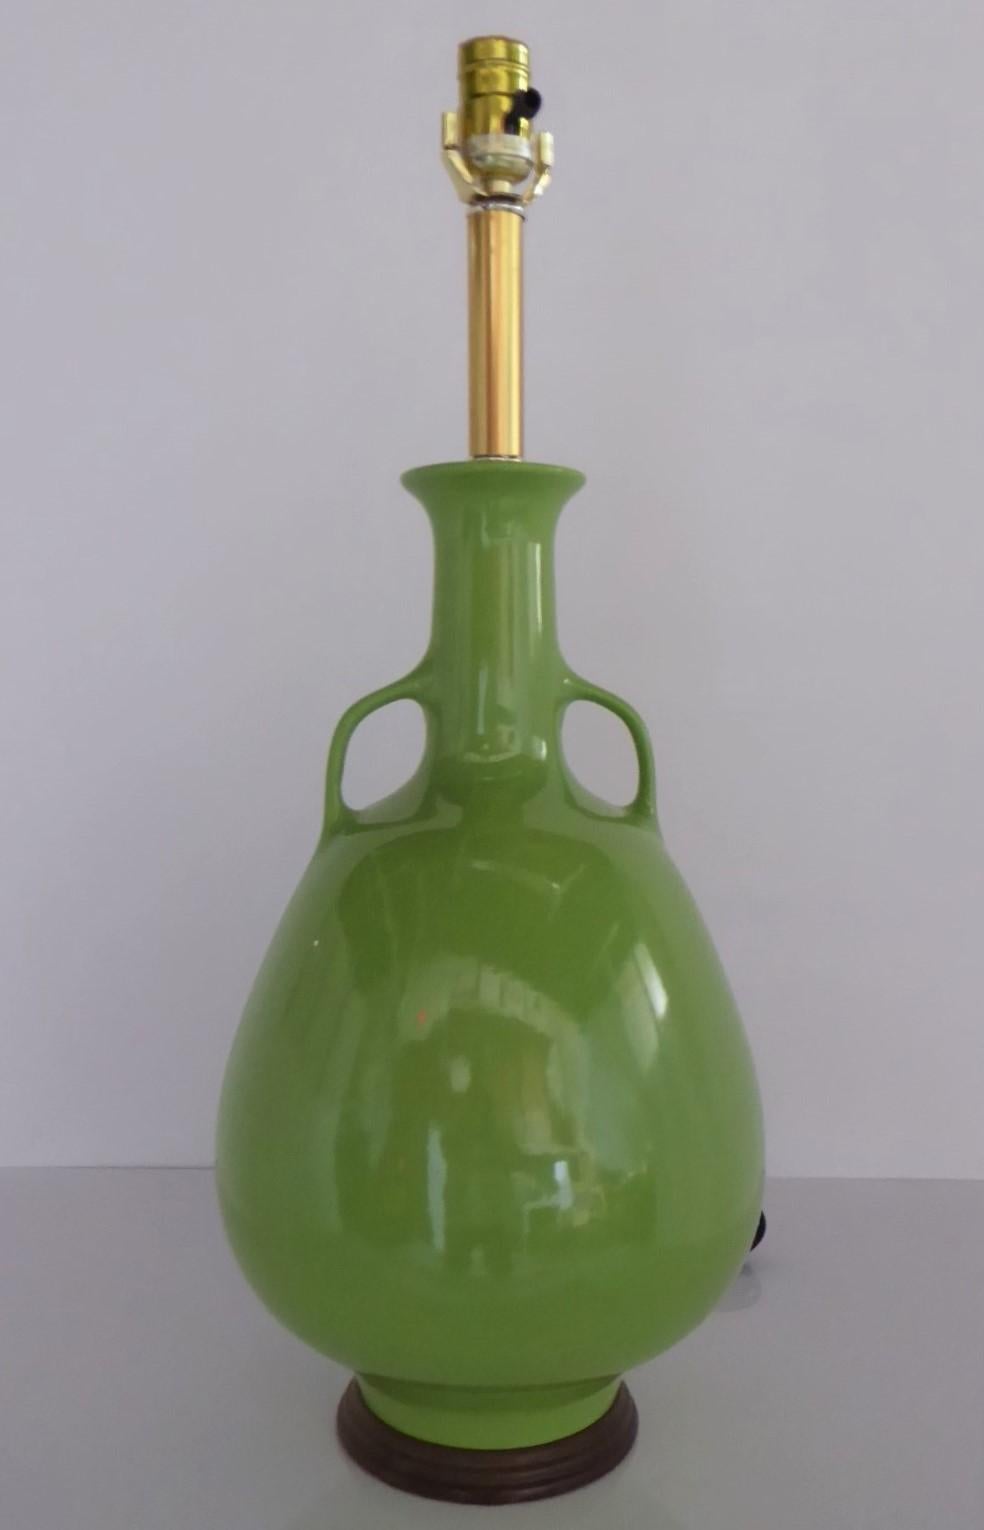 Mid-Century Modern green ceramic table lamp with an amphora shaped body and handles or arms at both sides of the neck. Rewired with 3-way UL socket. Beautiful vivid green color perfect in any Modern decor.
Measurements: 11 inches diameter x 24